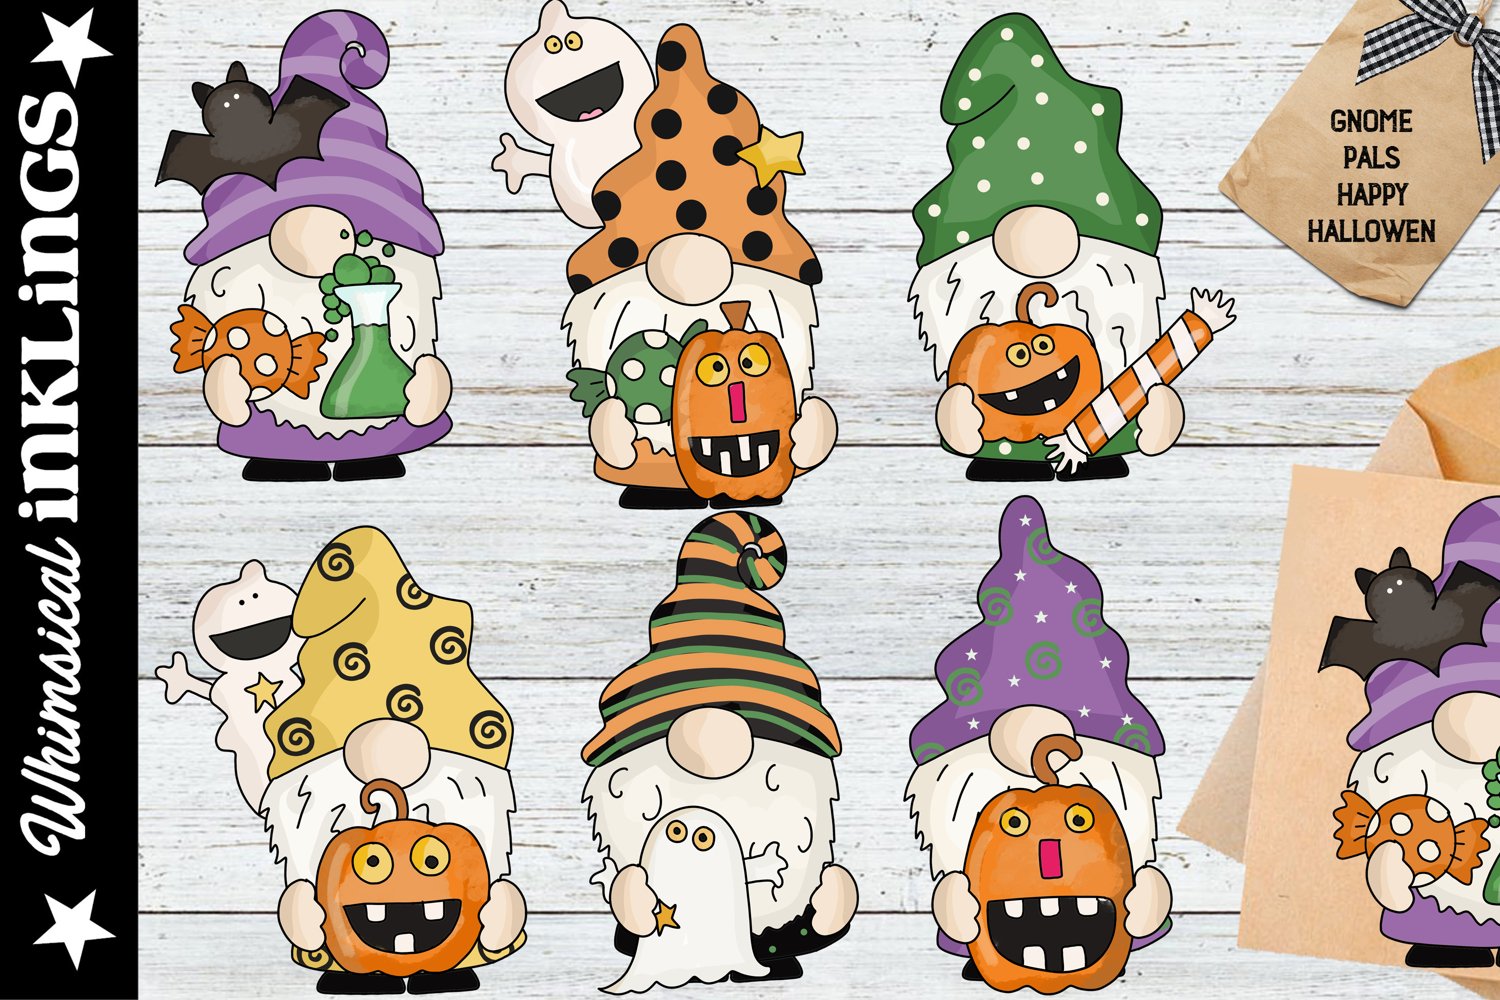 Happy Halloween - cute gnome pals.